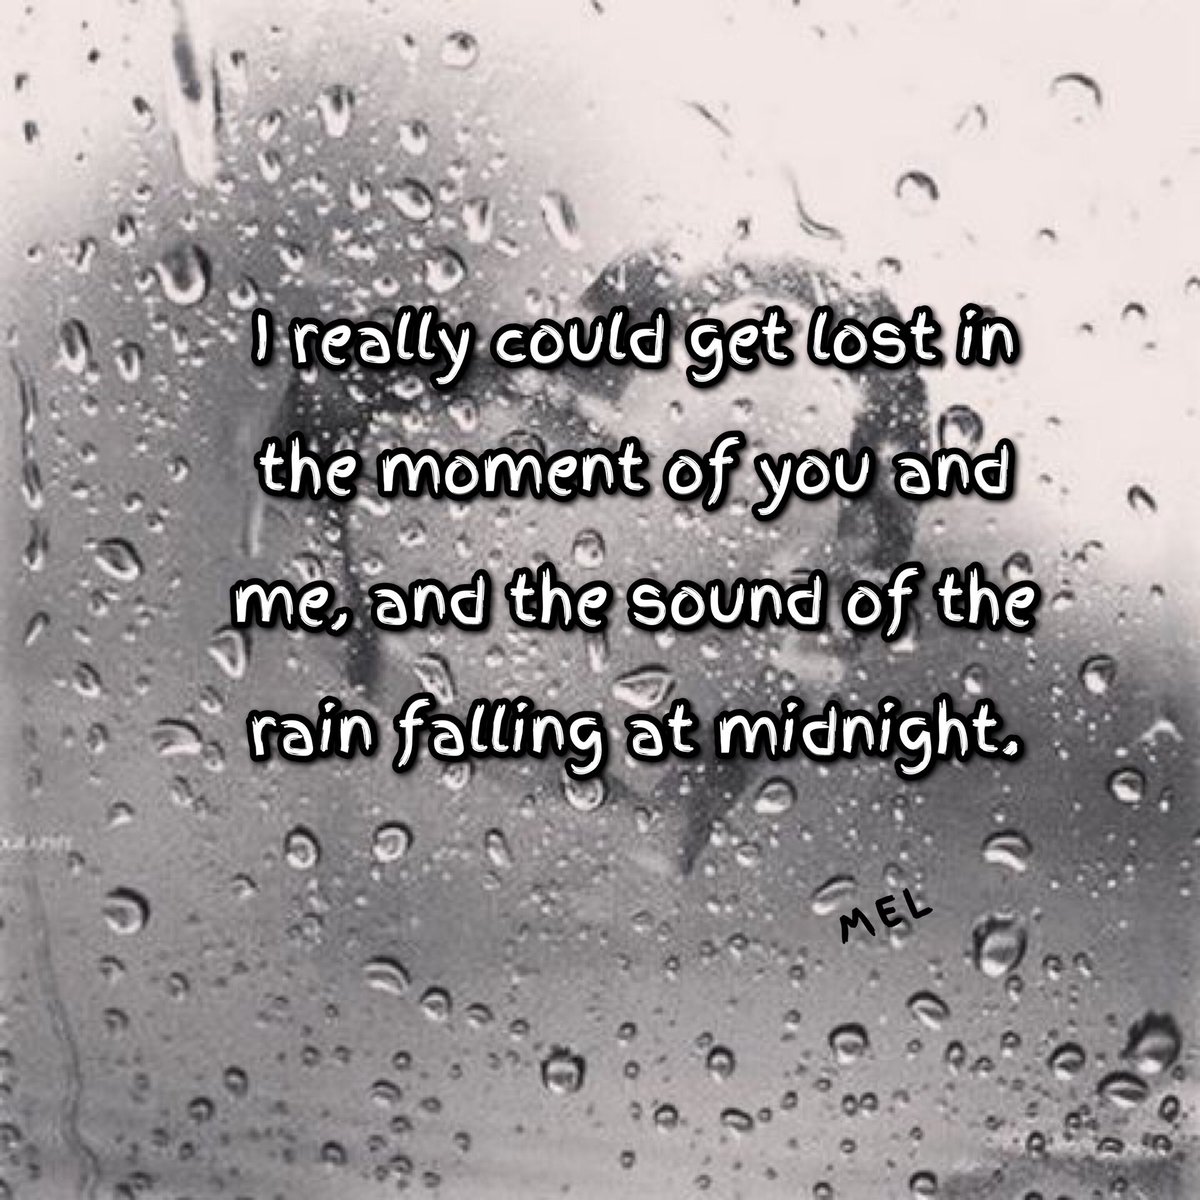 Just a little something I wrote. #poetry #byme #poetress #poetrycommunity #rainyday #ilovetherain #youandme #Love #rainfalling #midnightthoughts